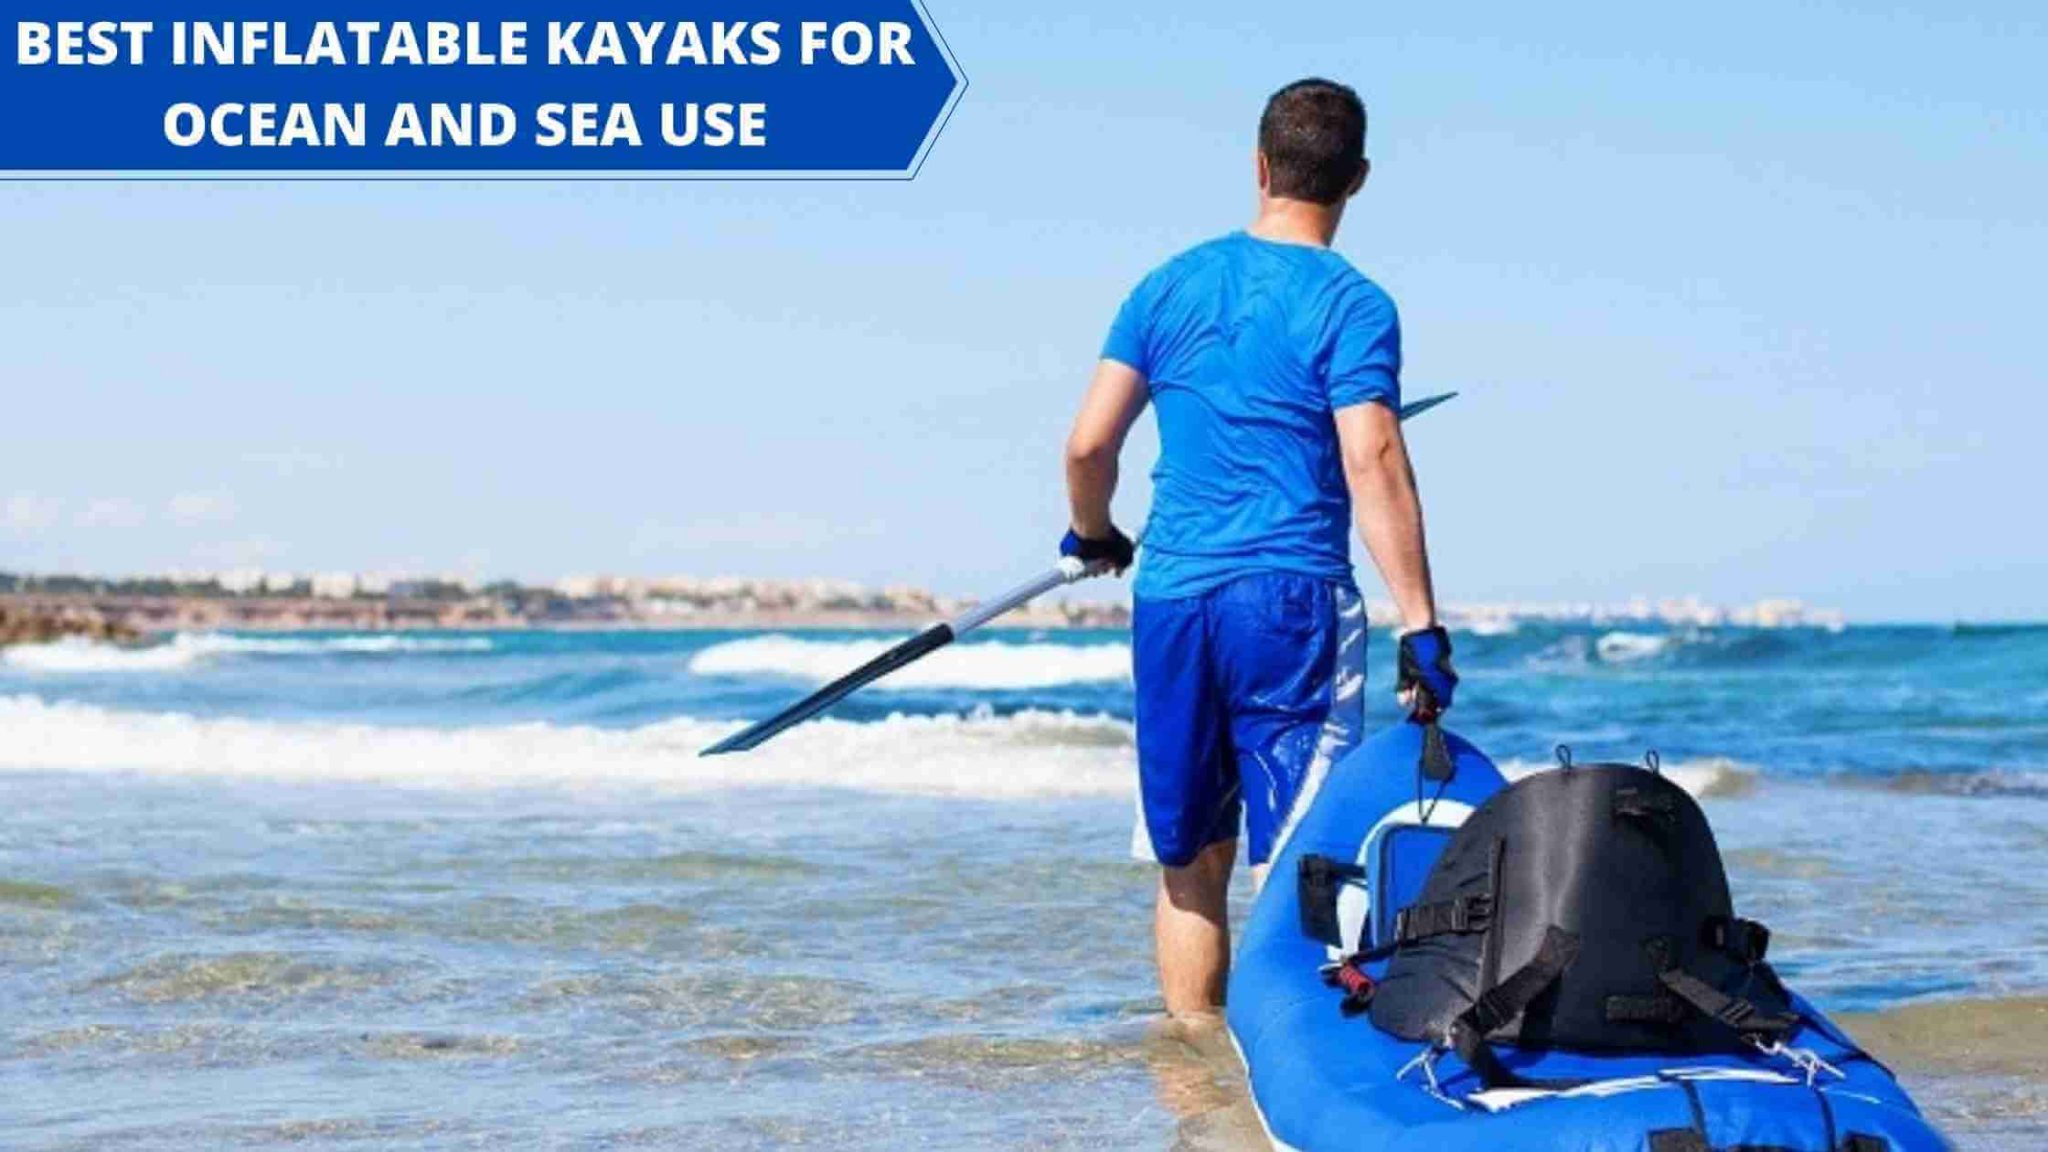 BEST INFLATABLE KAYAKS FOR OCEAN AND SEA USE